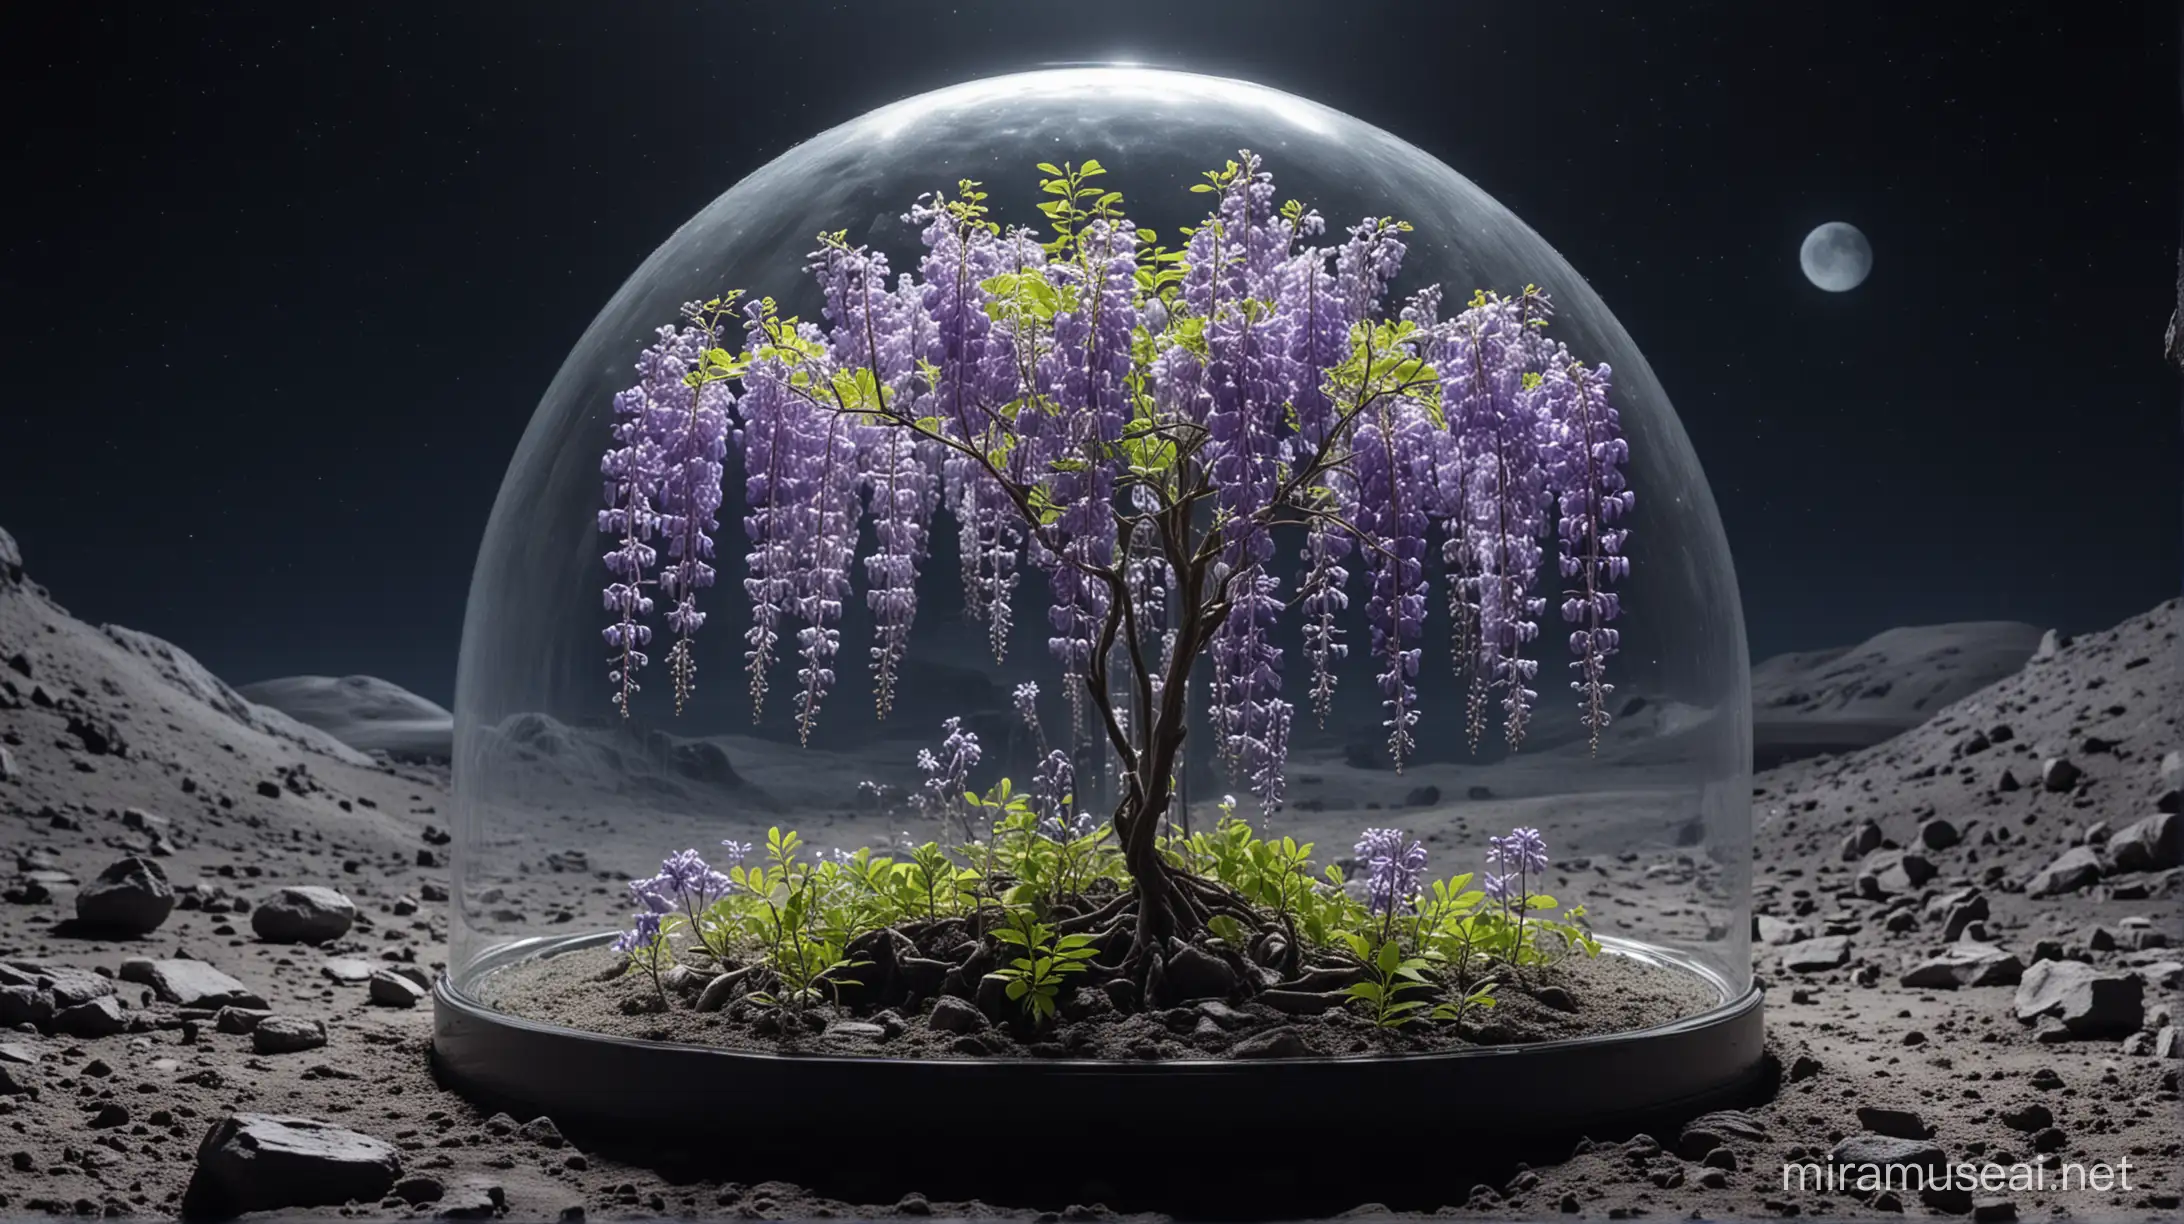 Wisteria Bush Captured Under Glass Dome on Moon Surface